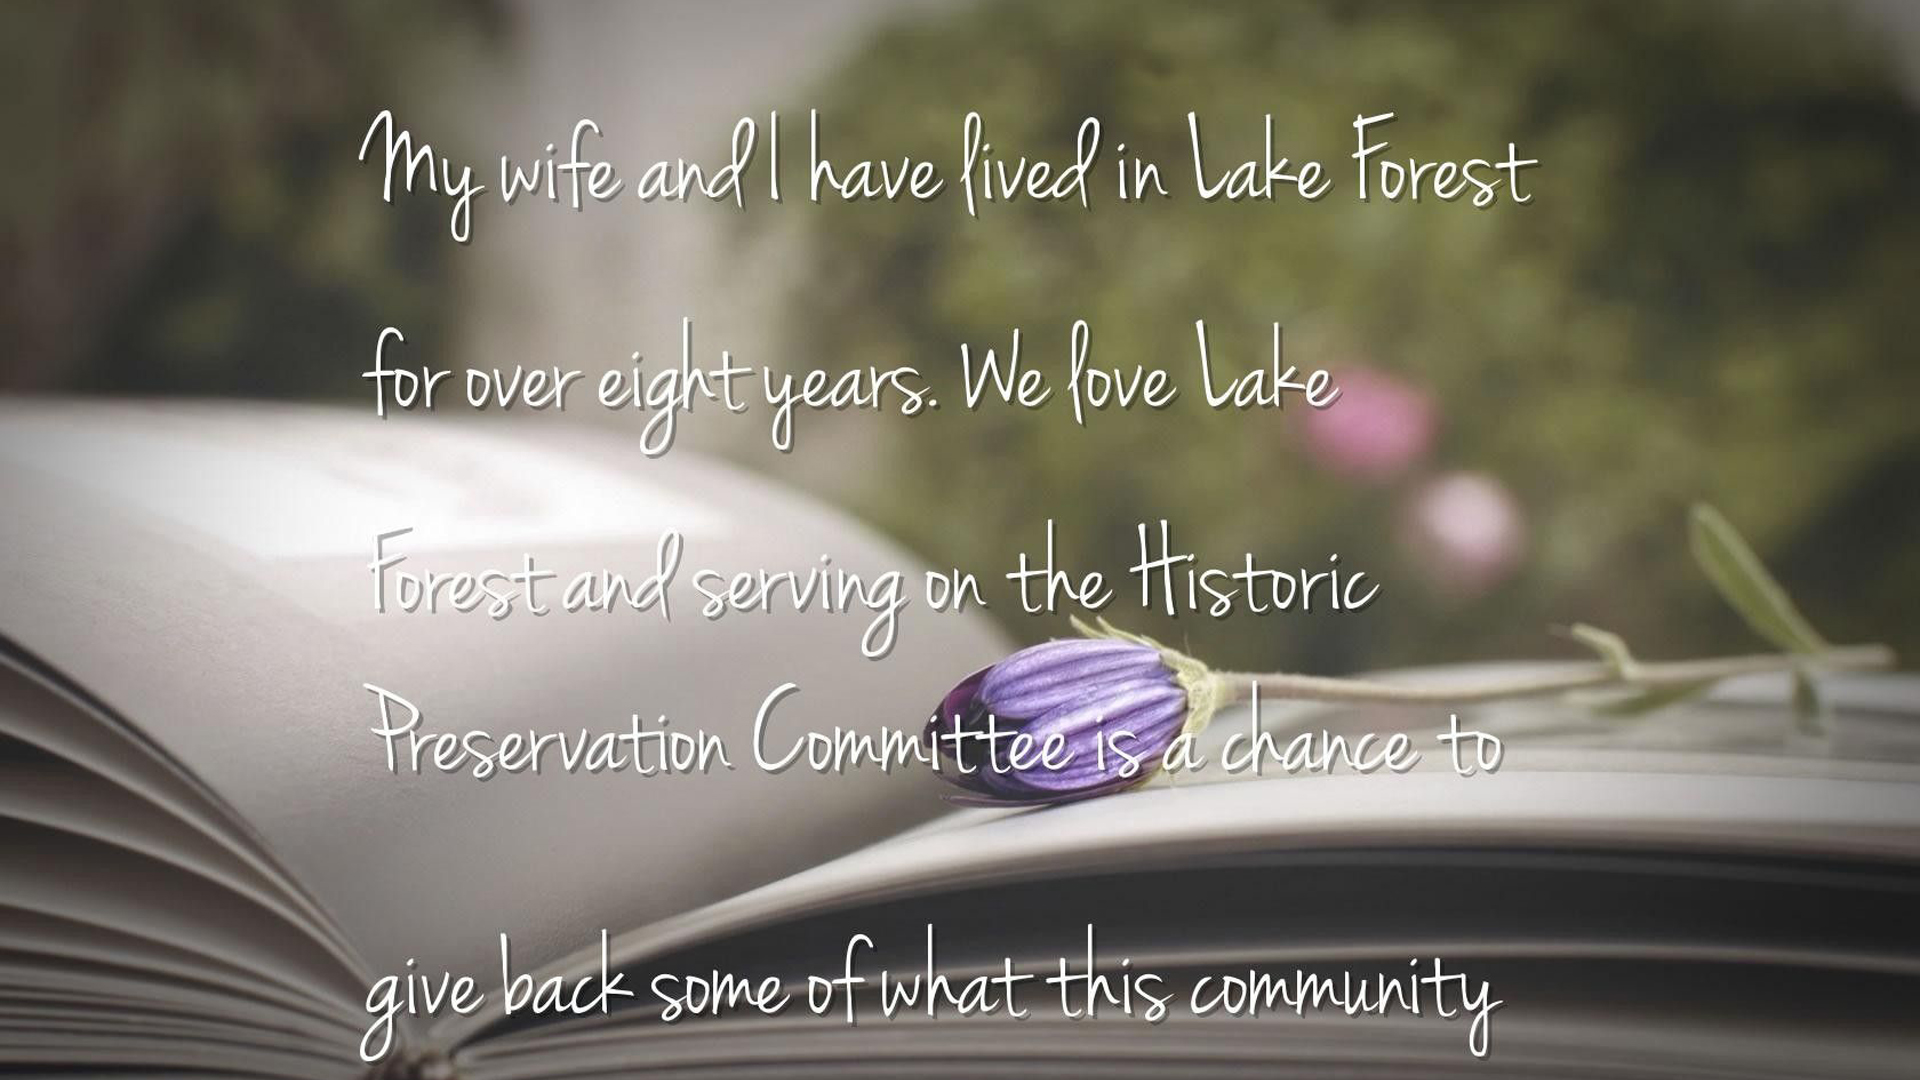 My Wife And I Have Lived In The Forest And Love Lake Forest And Serving On The Historic Preservation Committee 2K I Love